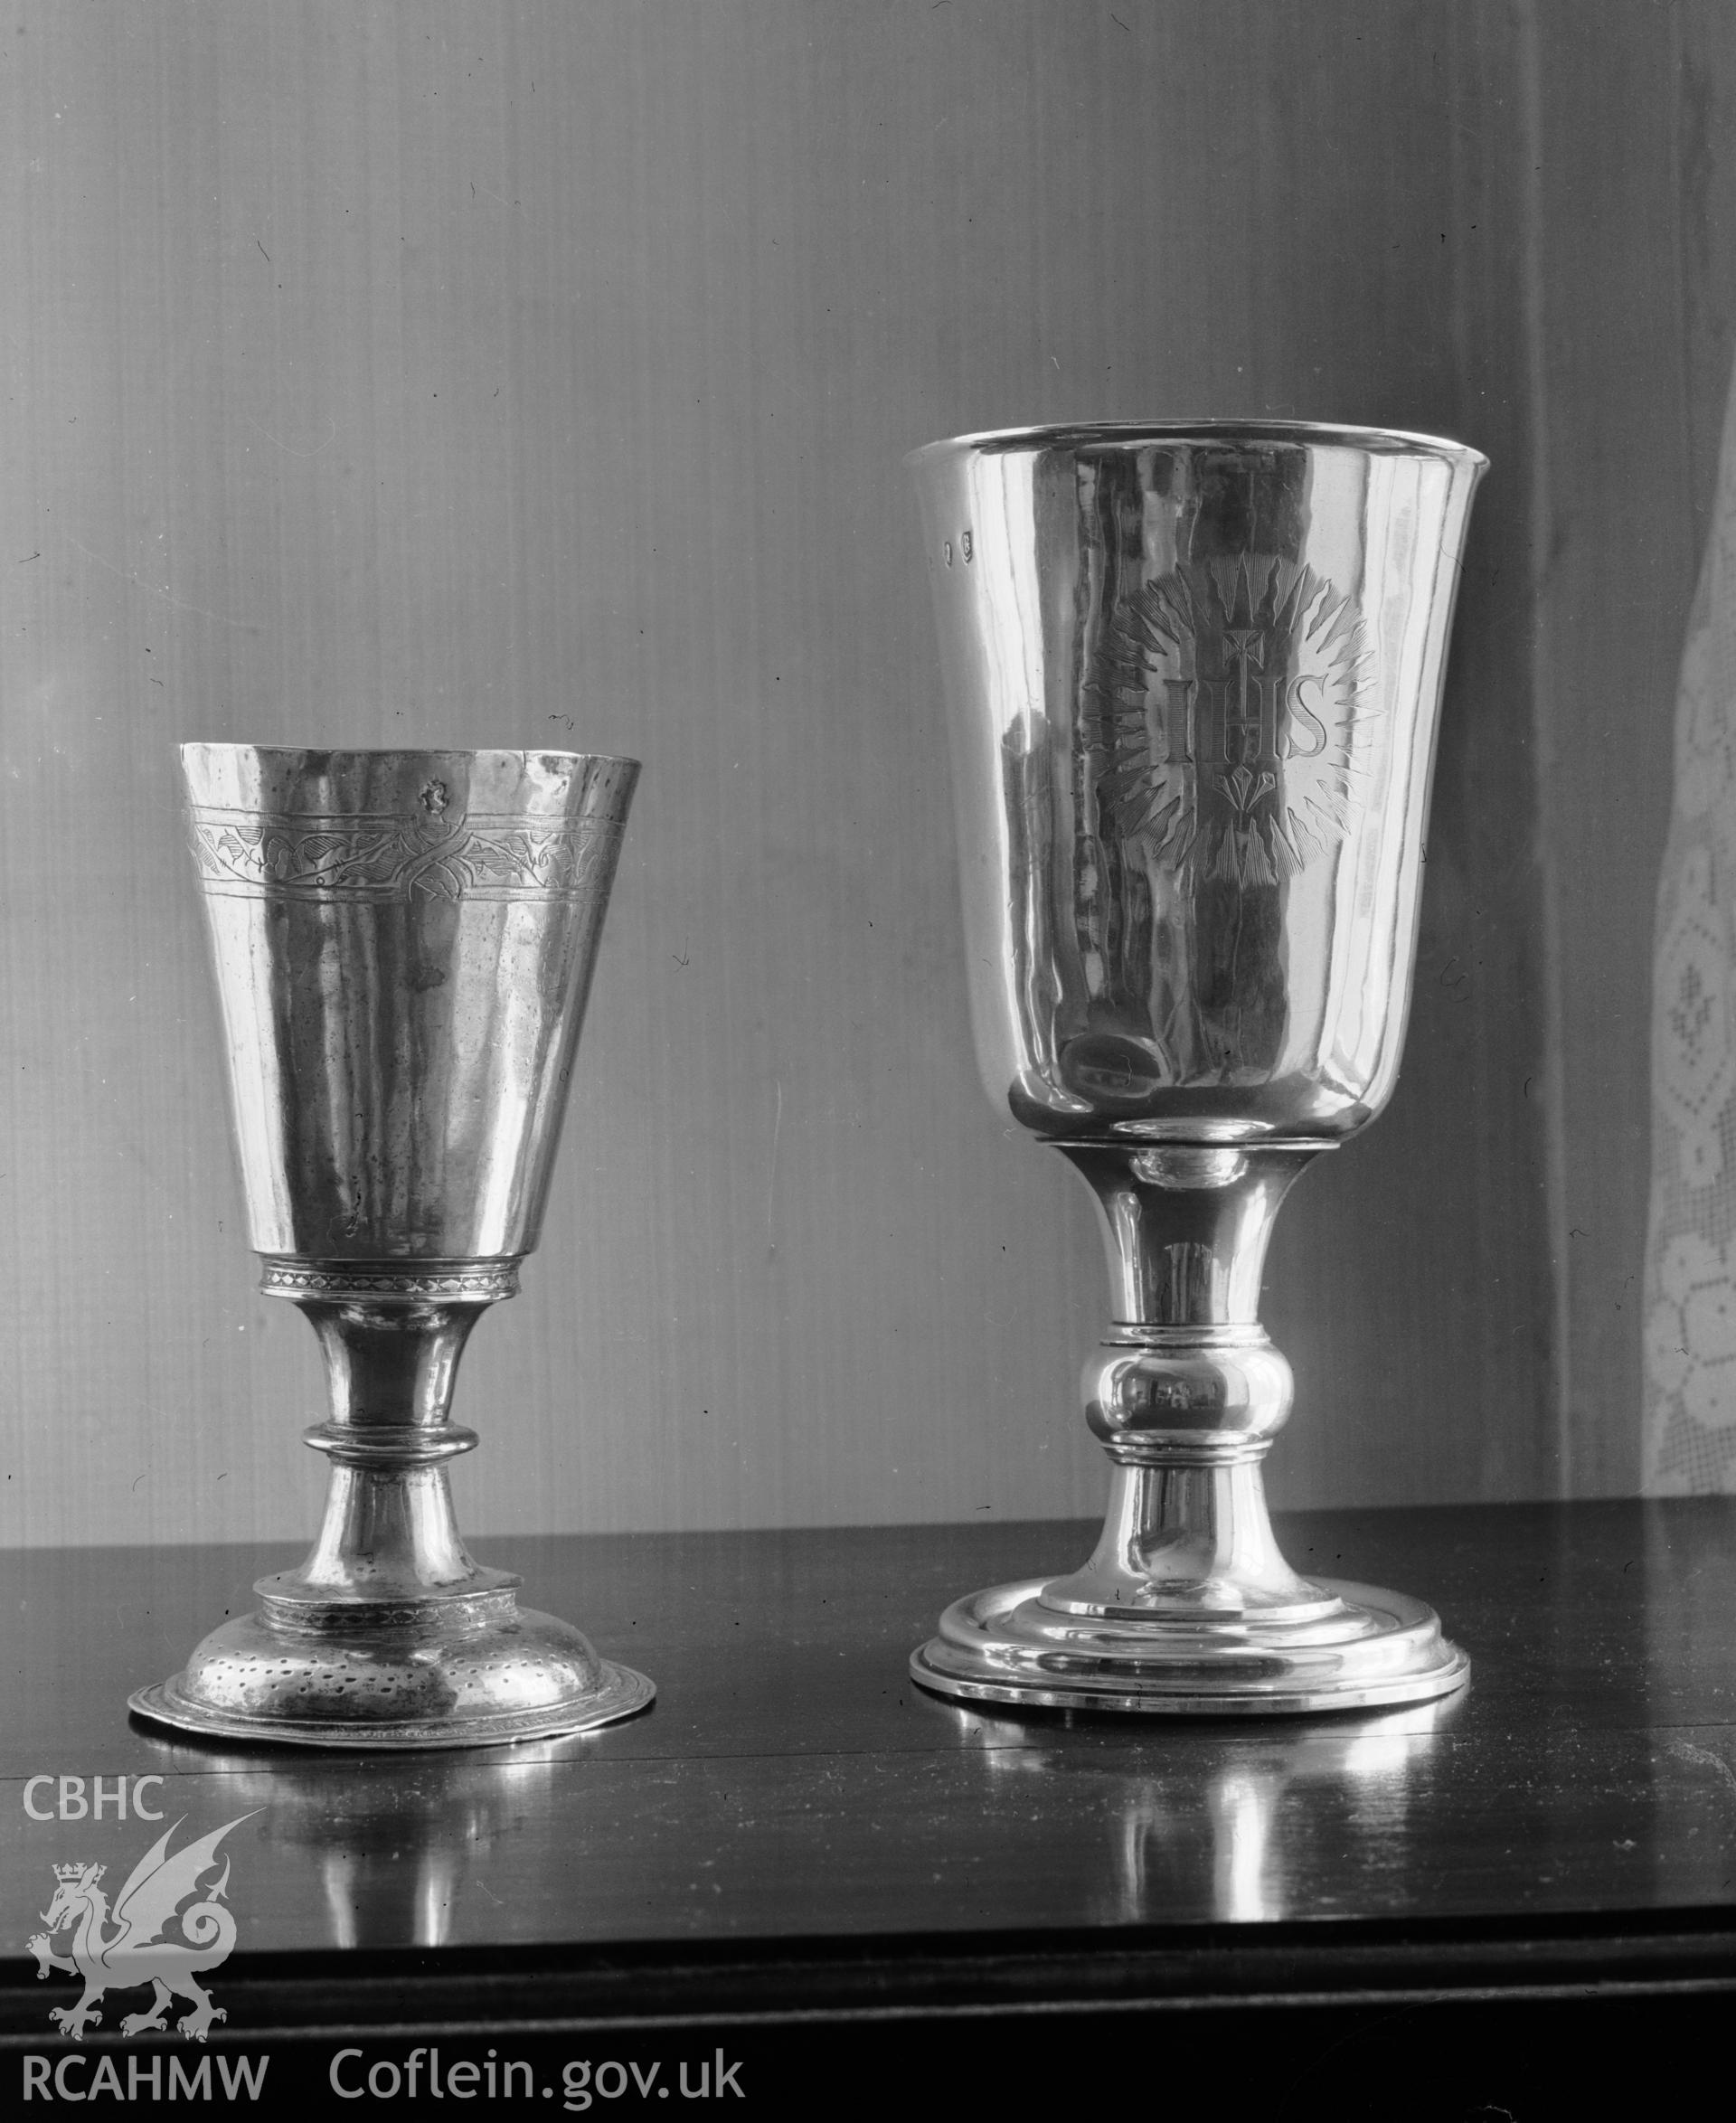 Display of church plate from St. Bodfan's Church taken 03.06.1939.